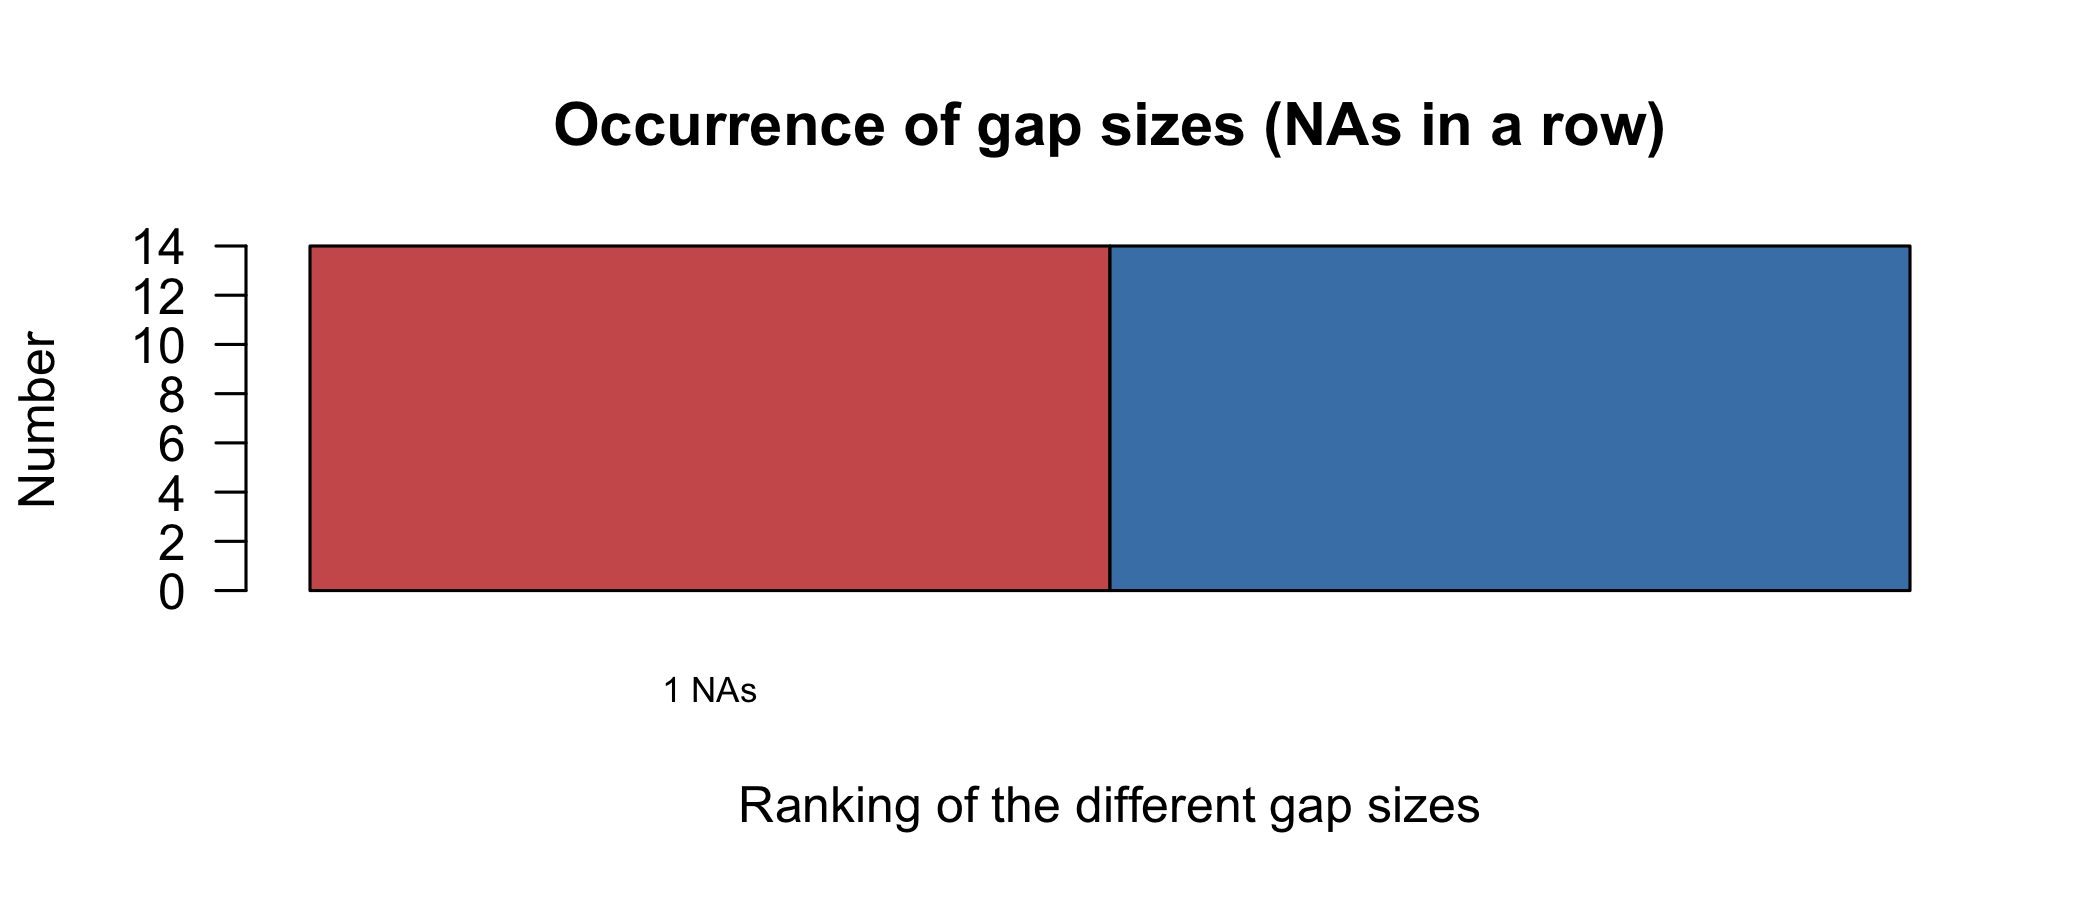 The occurrence plot show the summaries of distinct gap sizes, provided by the imputeTS package. The left-hand bar gives the number of occurrences for each gap size, with the corresponding tallies of NA on the right-hand side.